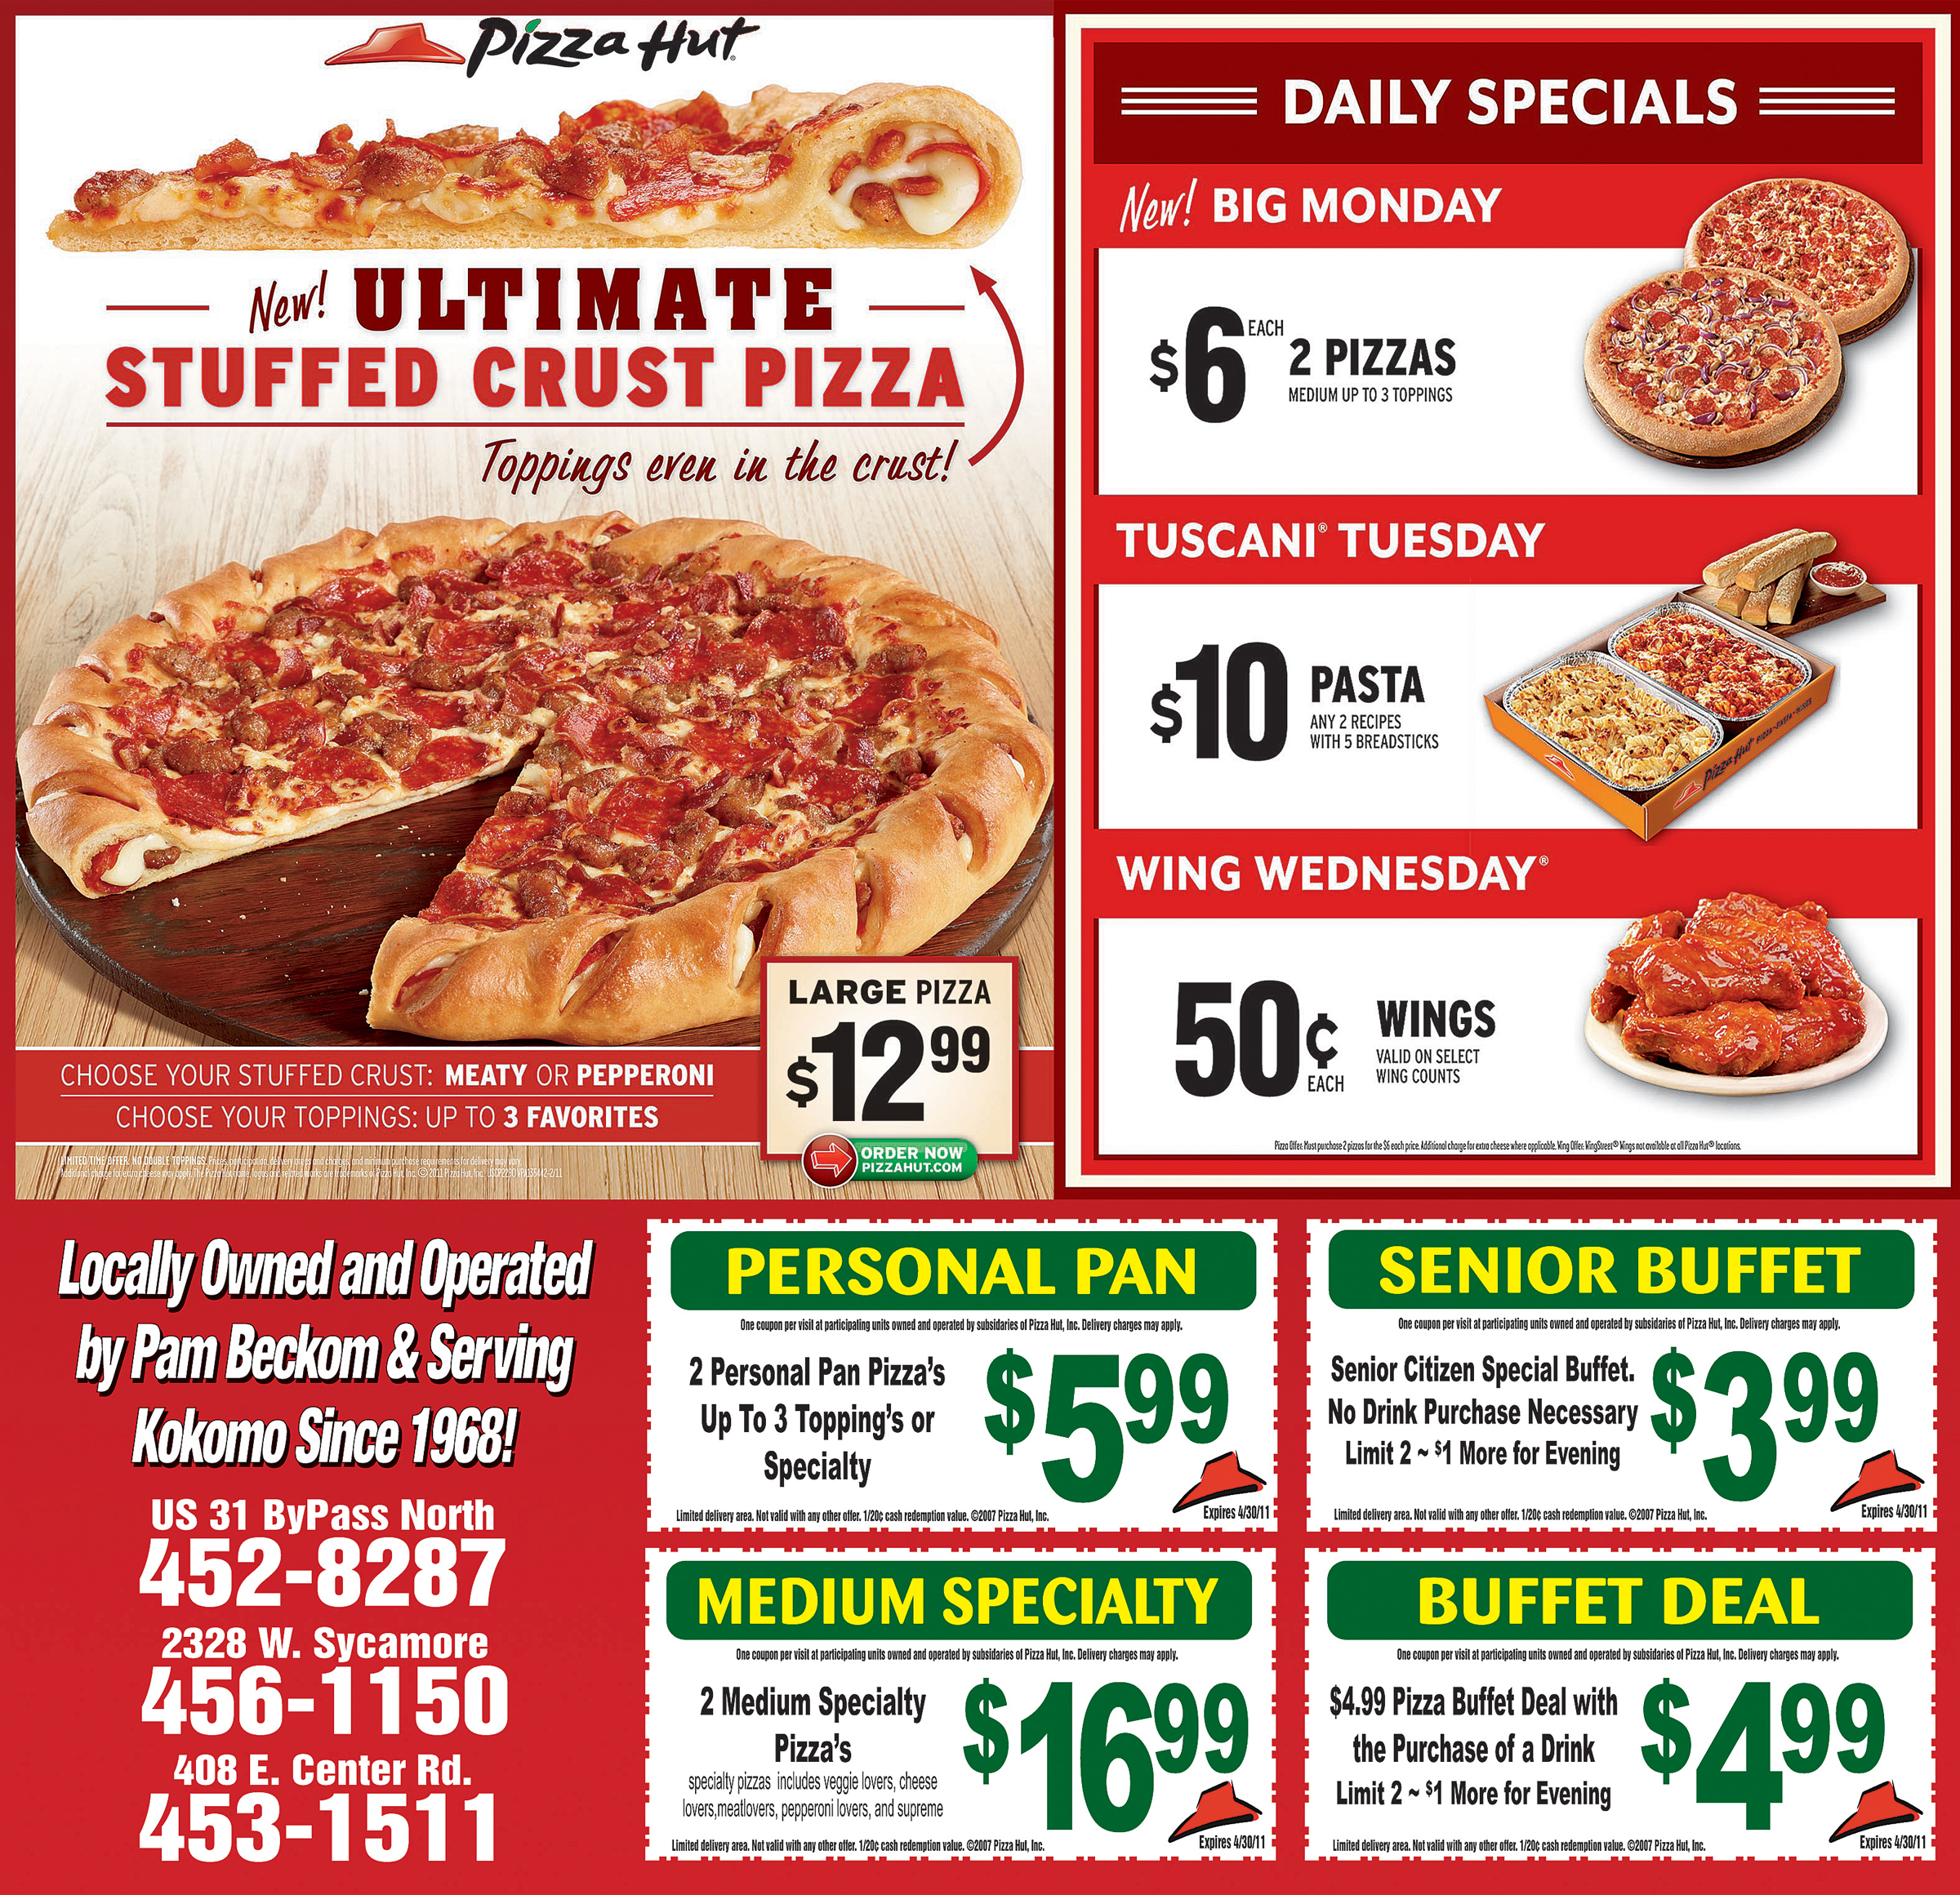 Get Your Pizza Hut Coupon | Printable Coupons Online - Free Printable Round Table Pizza Coupons